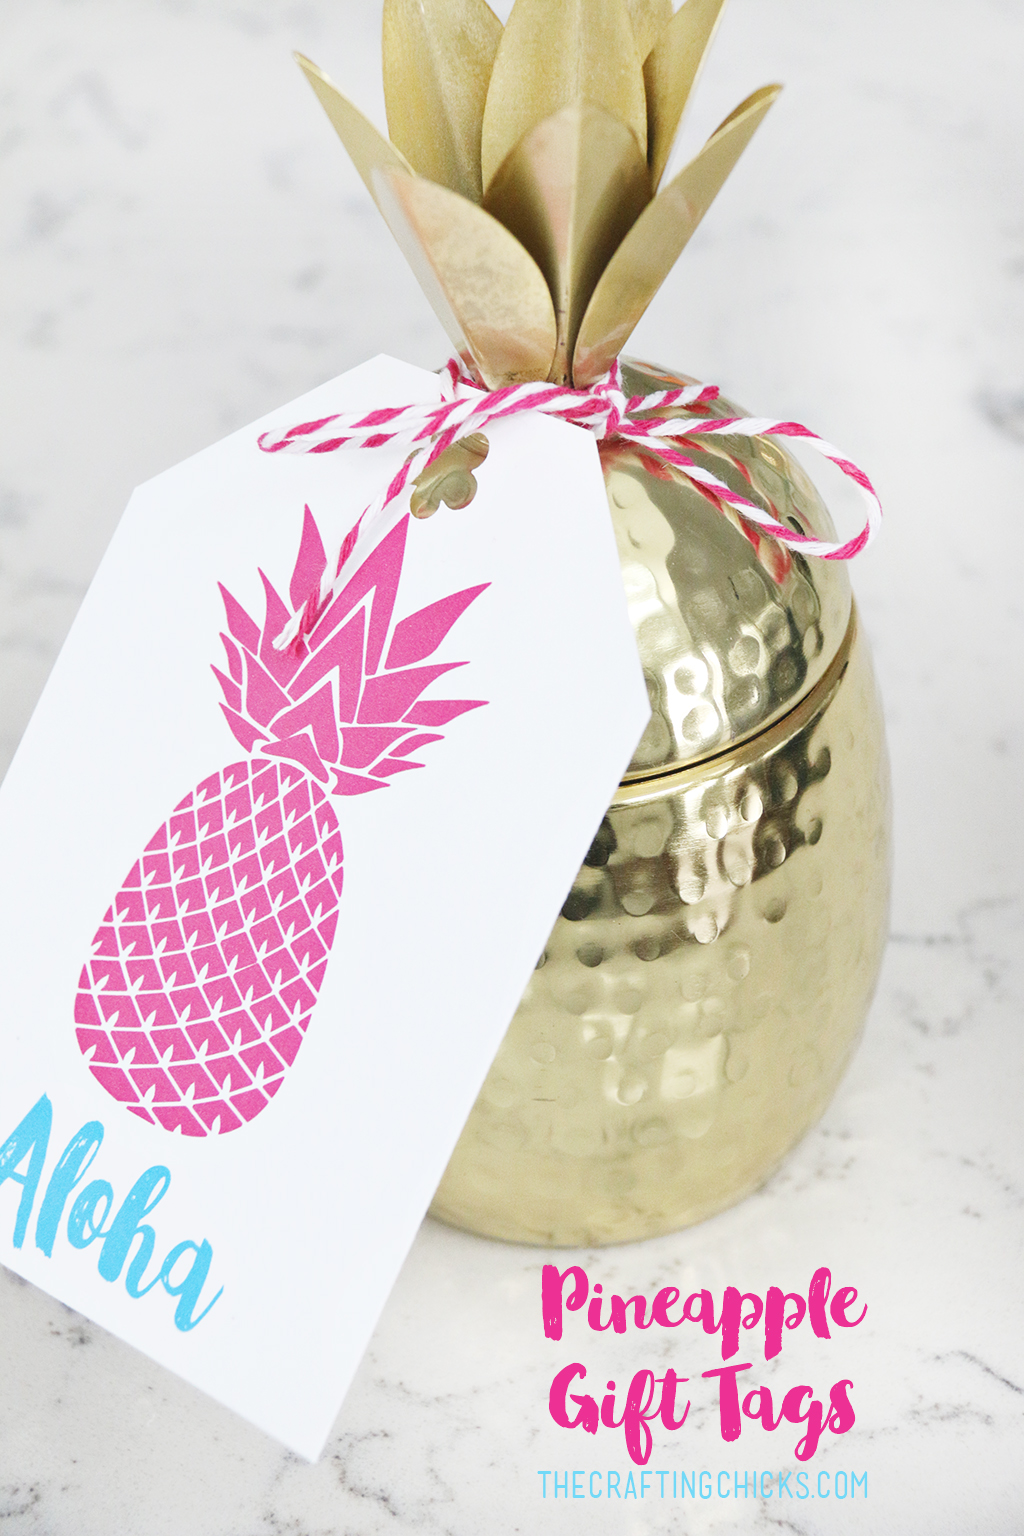 Printable Pineapple Gift Tags - Add these darling tags to any pineapple gift